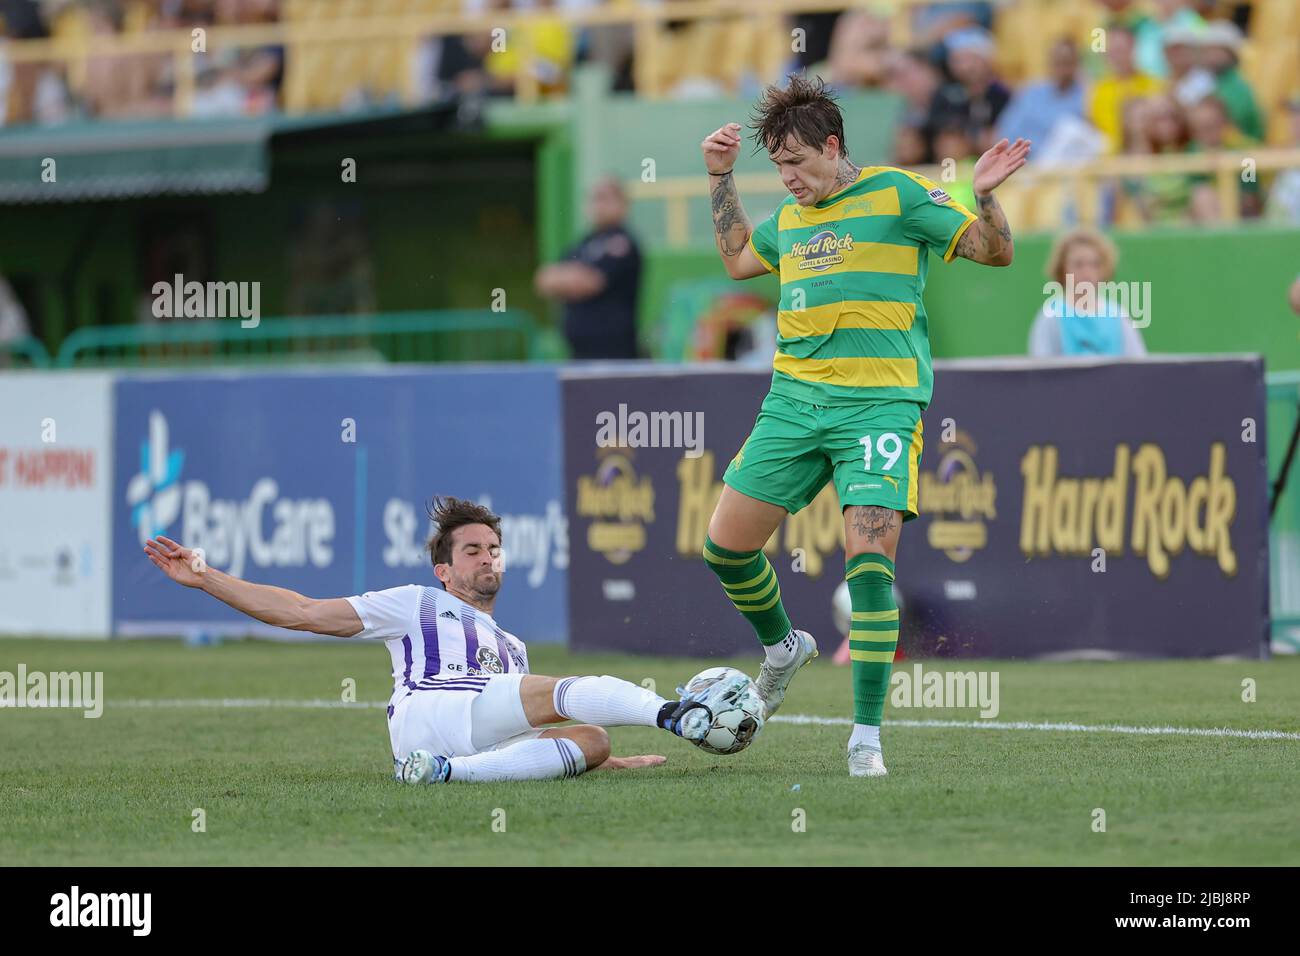 St. Petersburg, FL: Louisville City FC midfielder Tyler Gibson (12) slide tackles and trips up Tampa Bay Rowdies forward Jake LaCava (19) during a USL Stock Photo